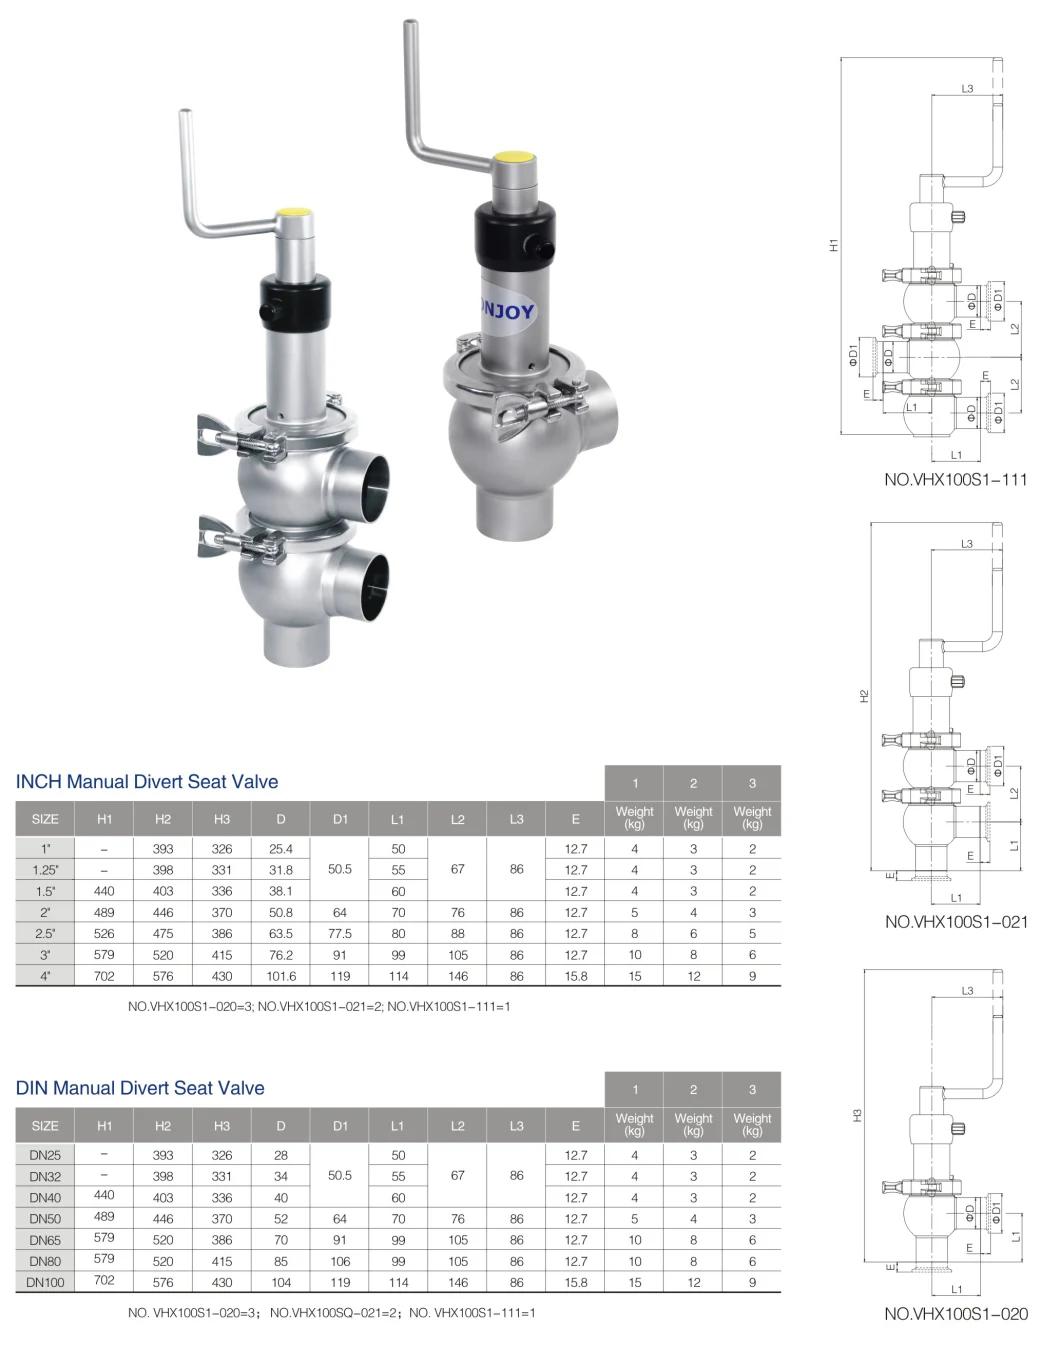 3A Certified Sanitary Air Operated Shut-off and Divert Valve